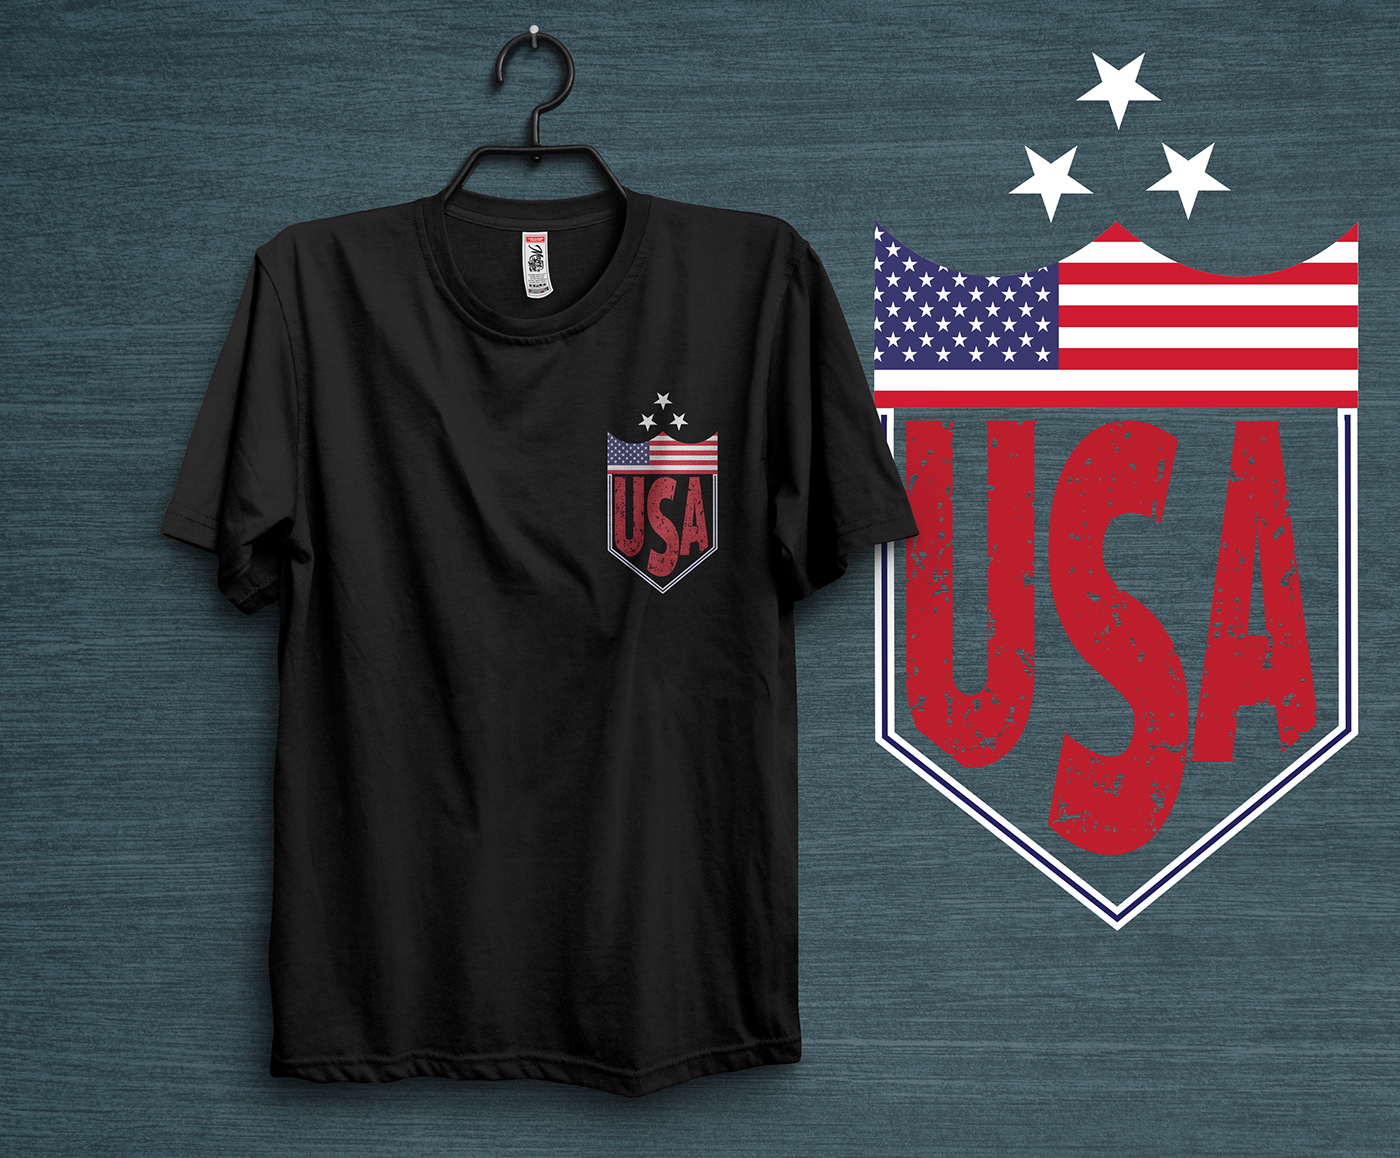 t shirt design Usa army t-shirt independence day 4th of July america united states Army T-Shirt Design USA 4TH T-SHIRT veteran design